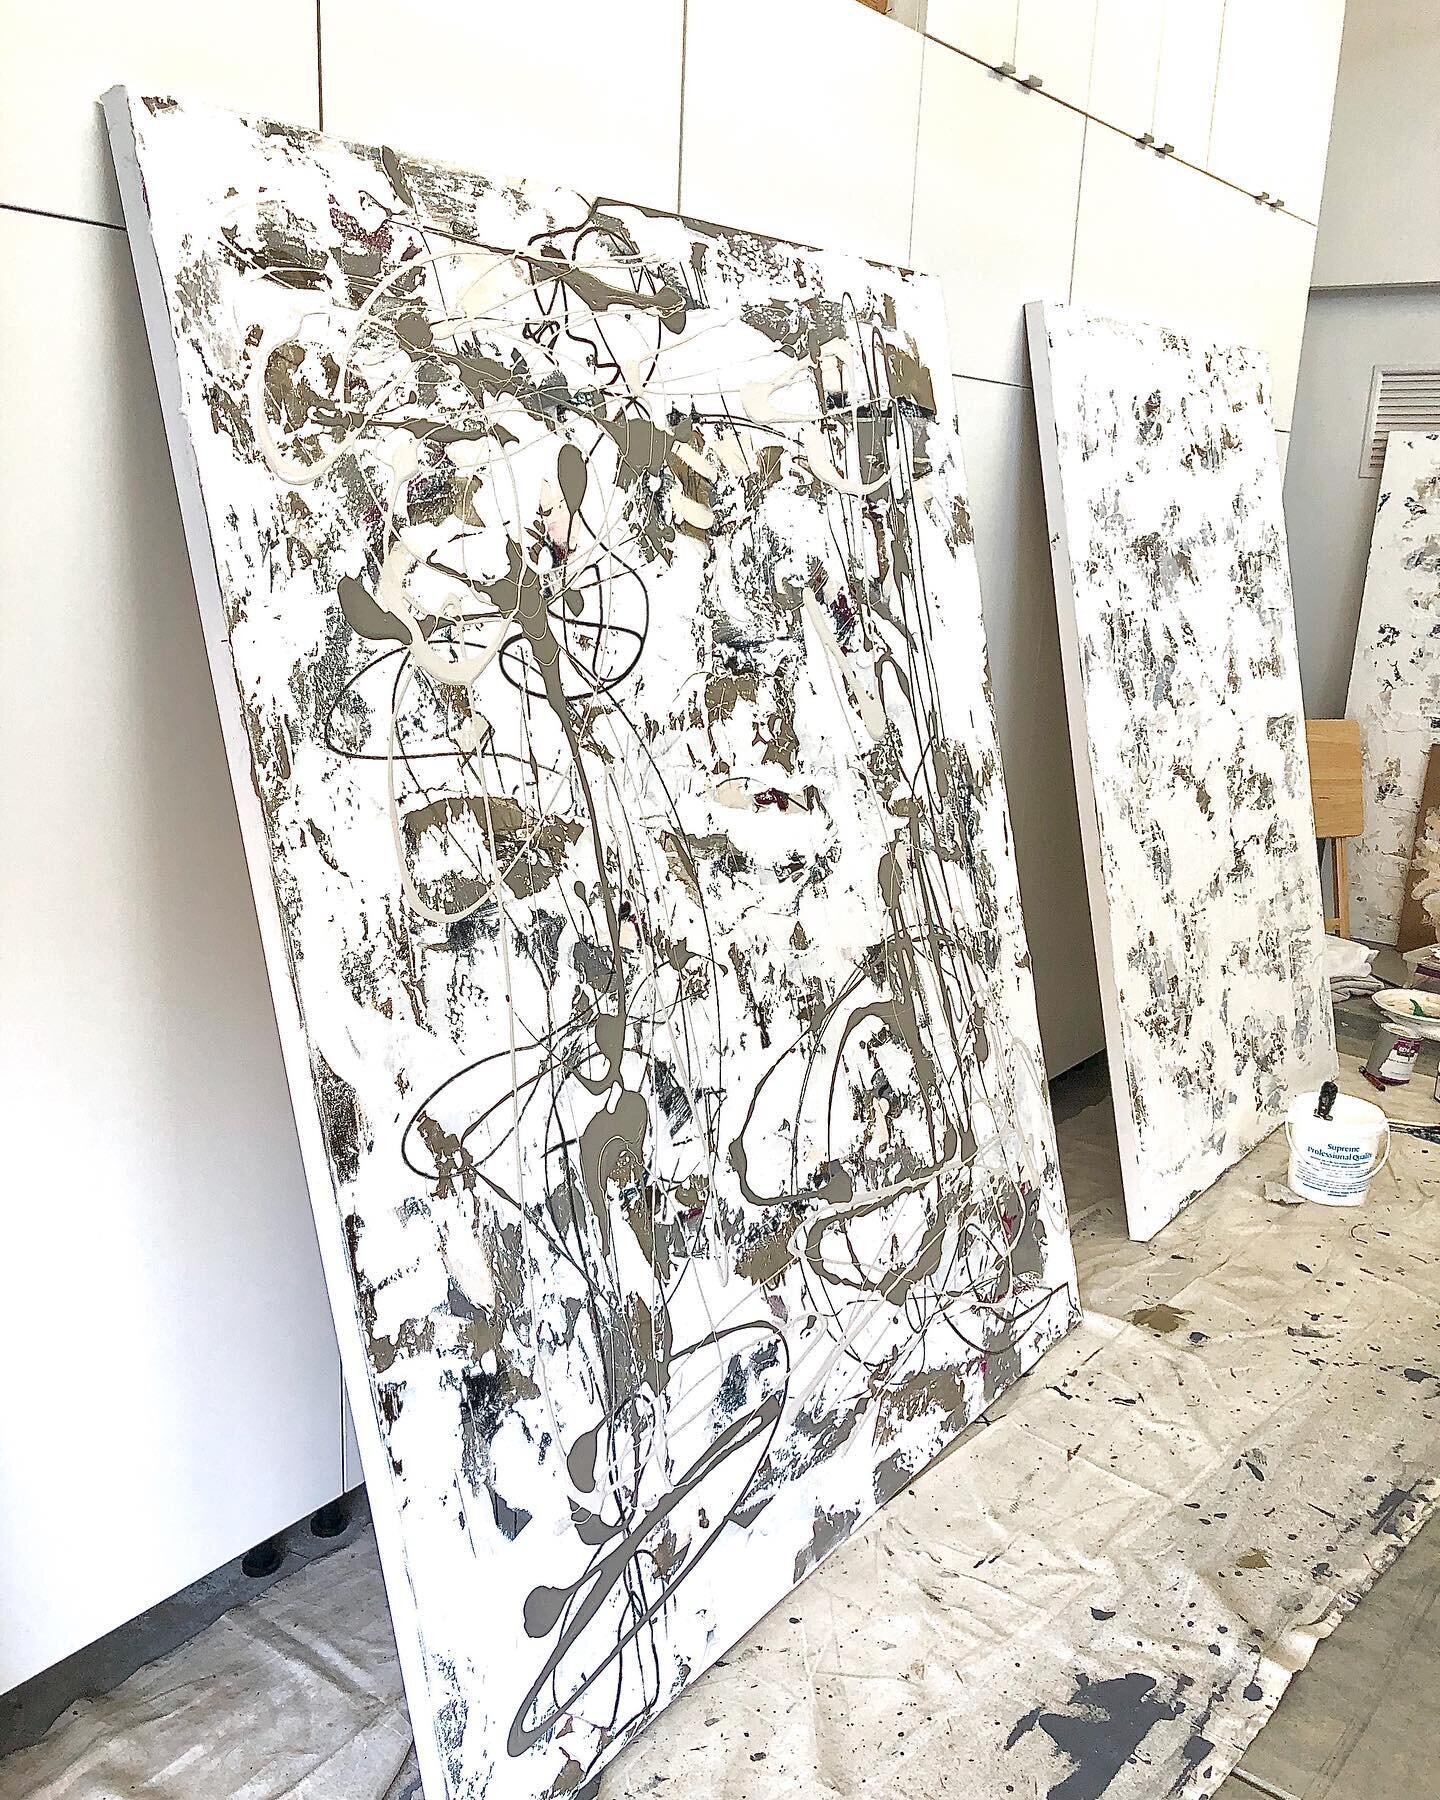 Living in a land of chaos, searching for serenity 〰️〰️▪️◾️▪️
.
.
.
.
#texture #line #whitepainting #meditationspace #abstractexpressionism 
#art #contemporaryart #artist #modernart  #artwork #instagood # #artsy #artofinstagram #abstractart #instaart 